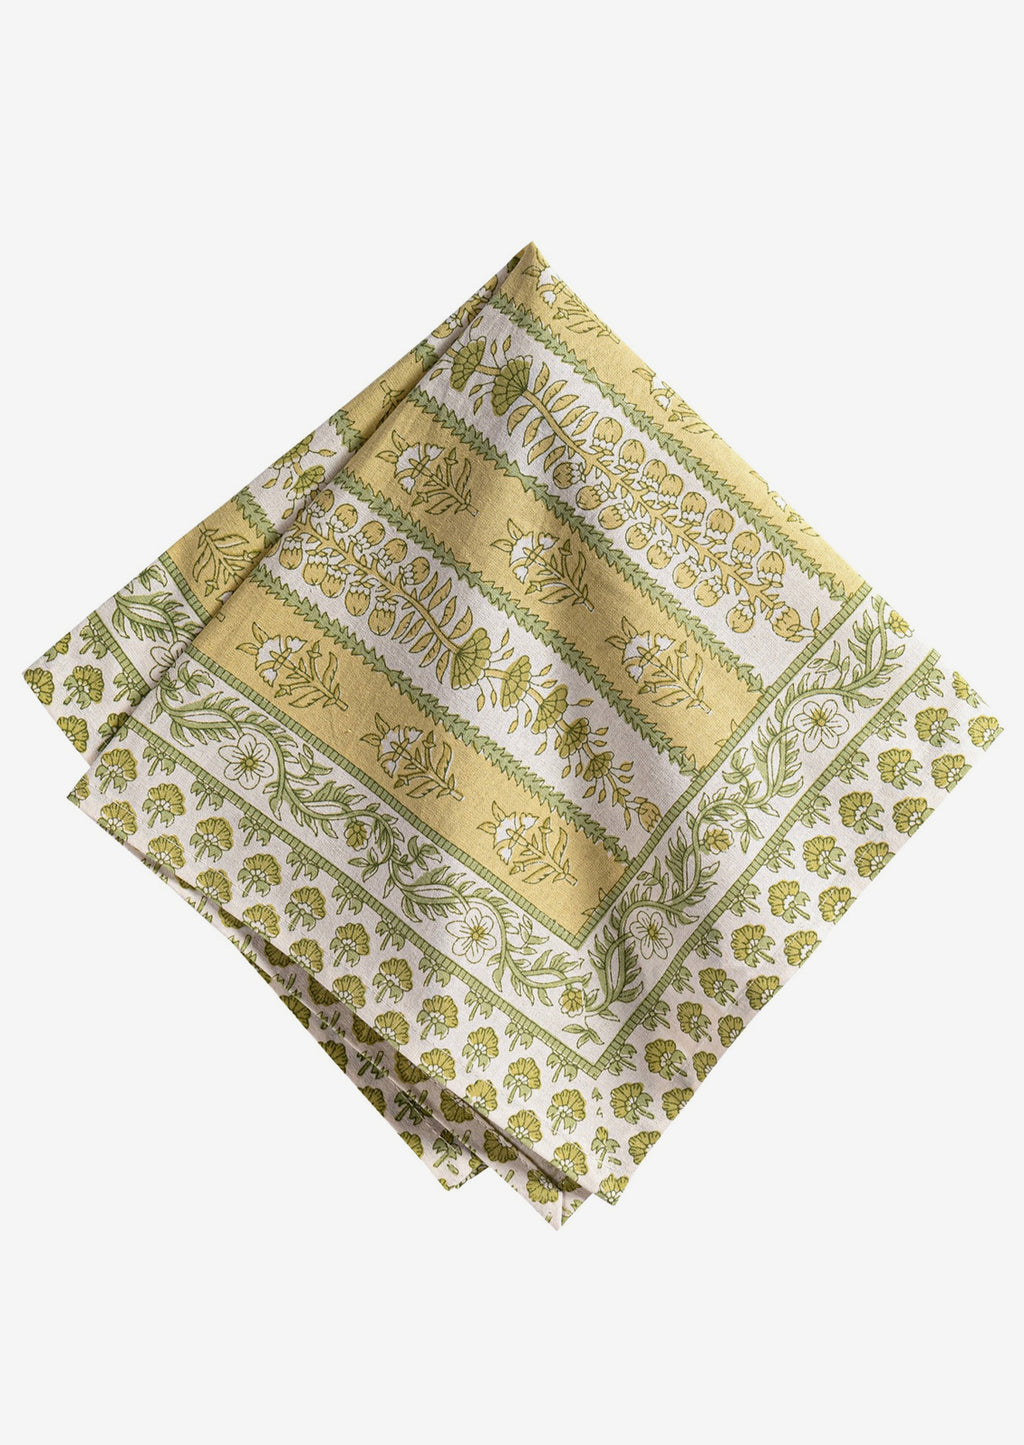 3: A set of green and yellow floral print napkins.